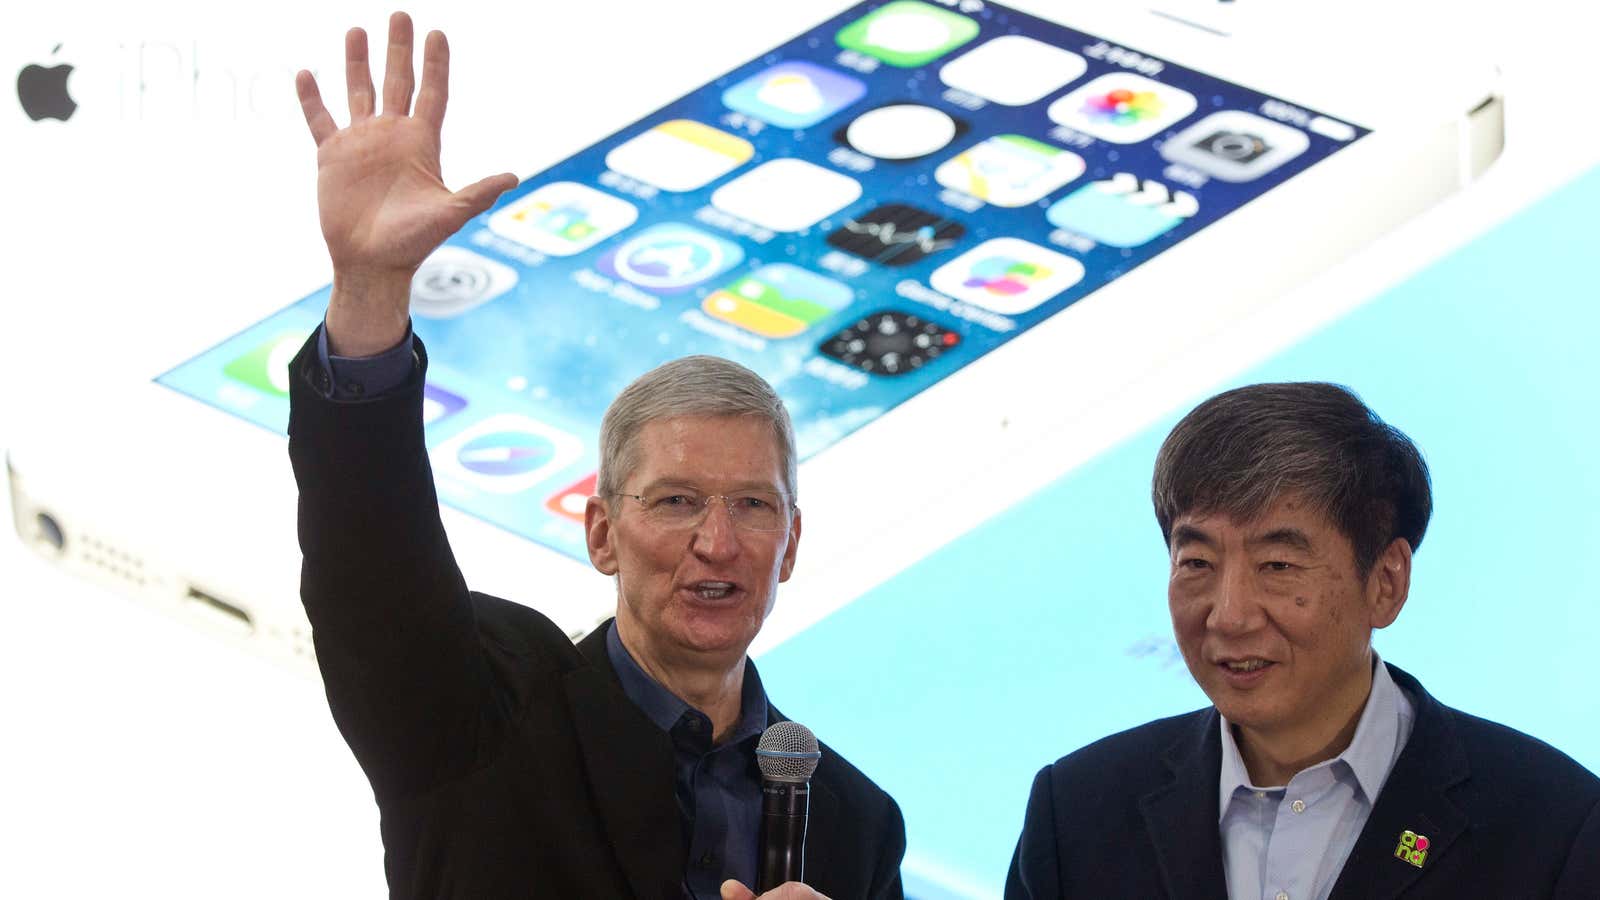 Tim Cook launches the iPhone with China Mobile chairman Xi Guohua.